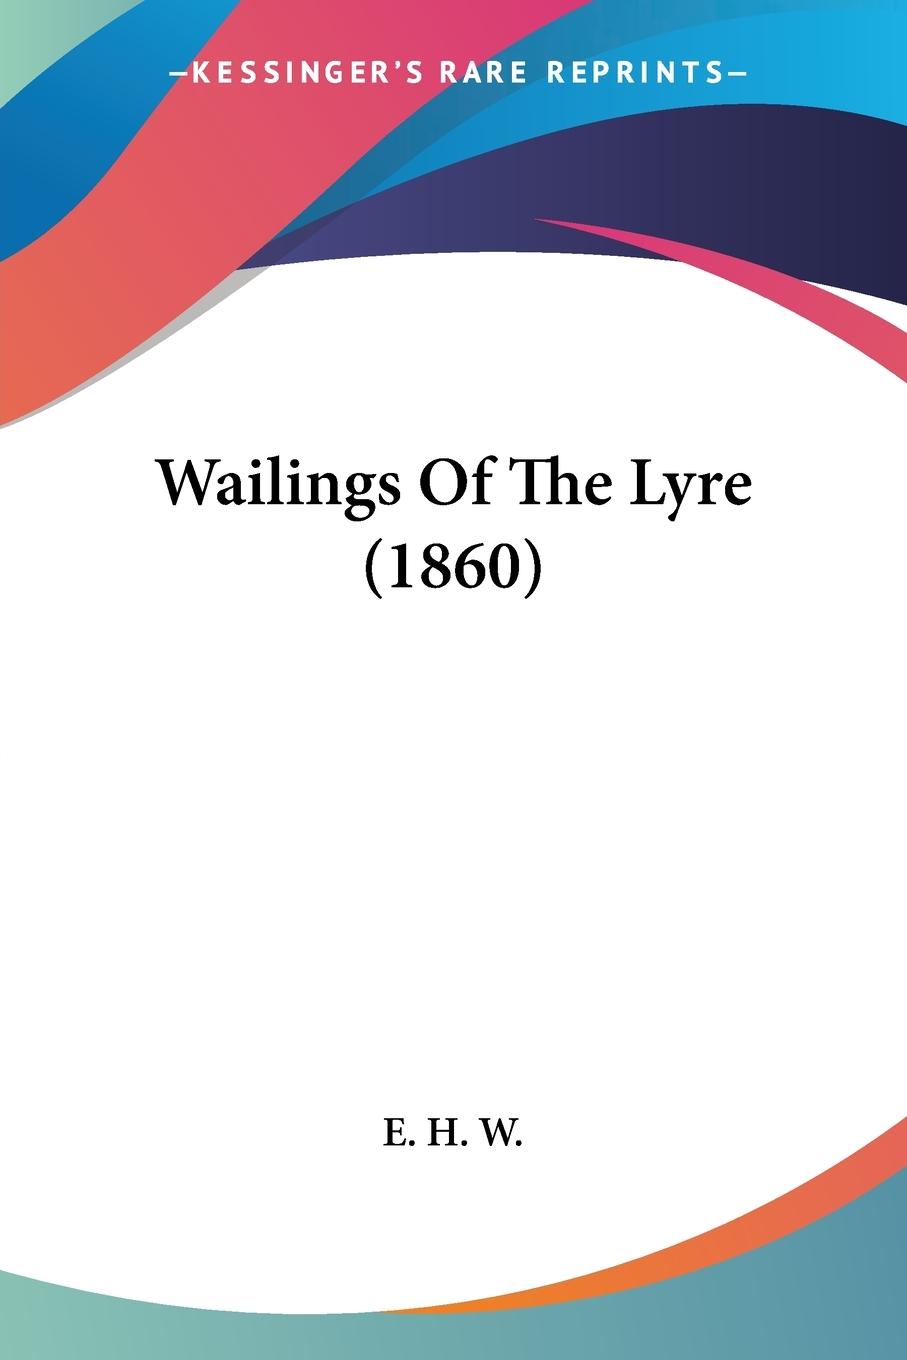 Wailings Of The Lyre (1860) - E. H. W.